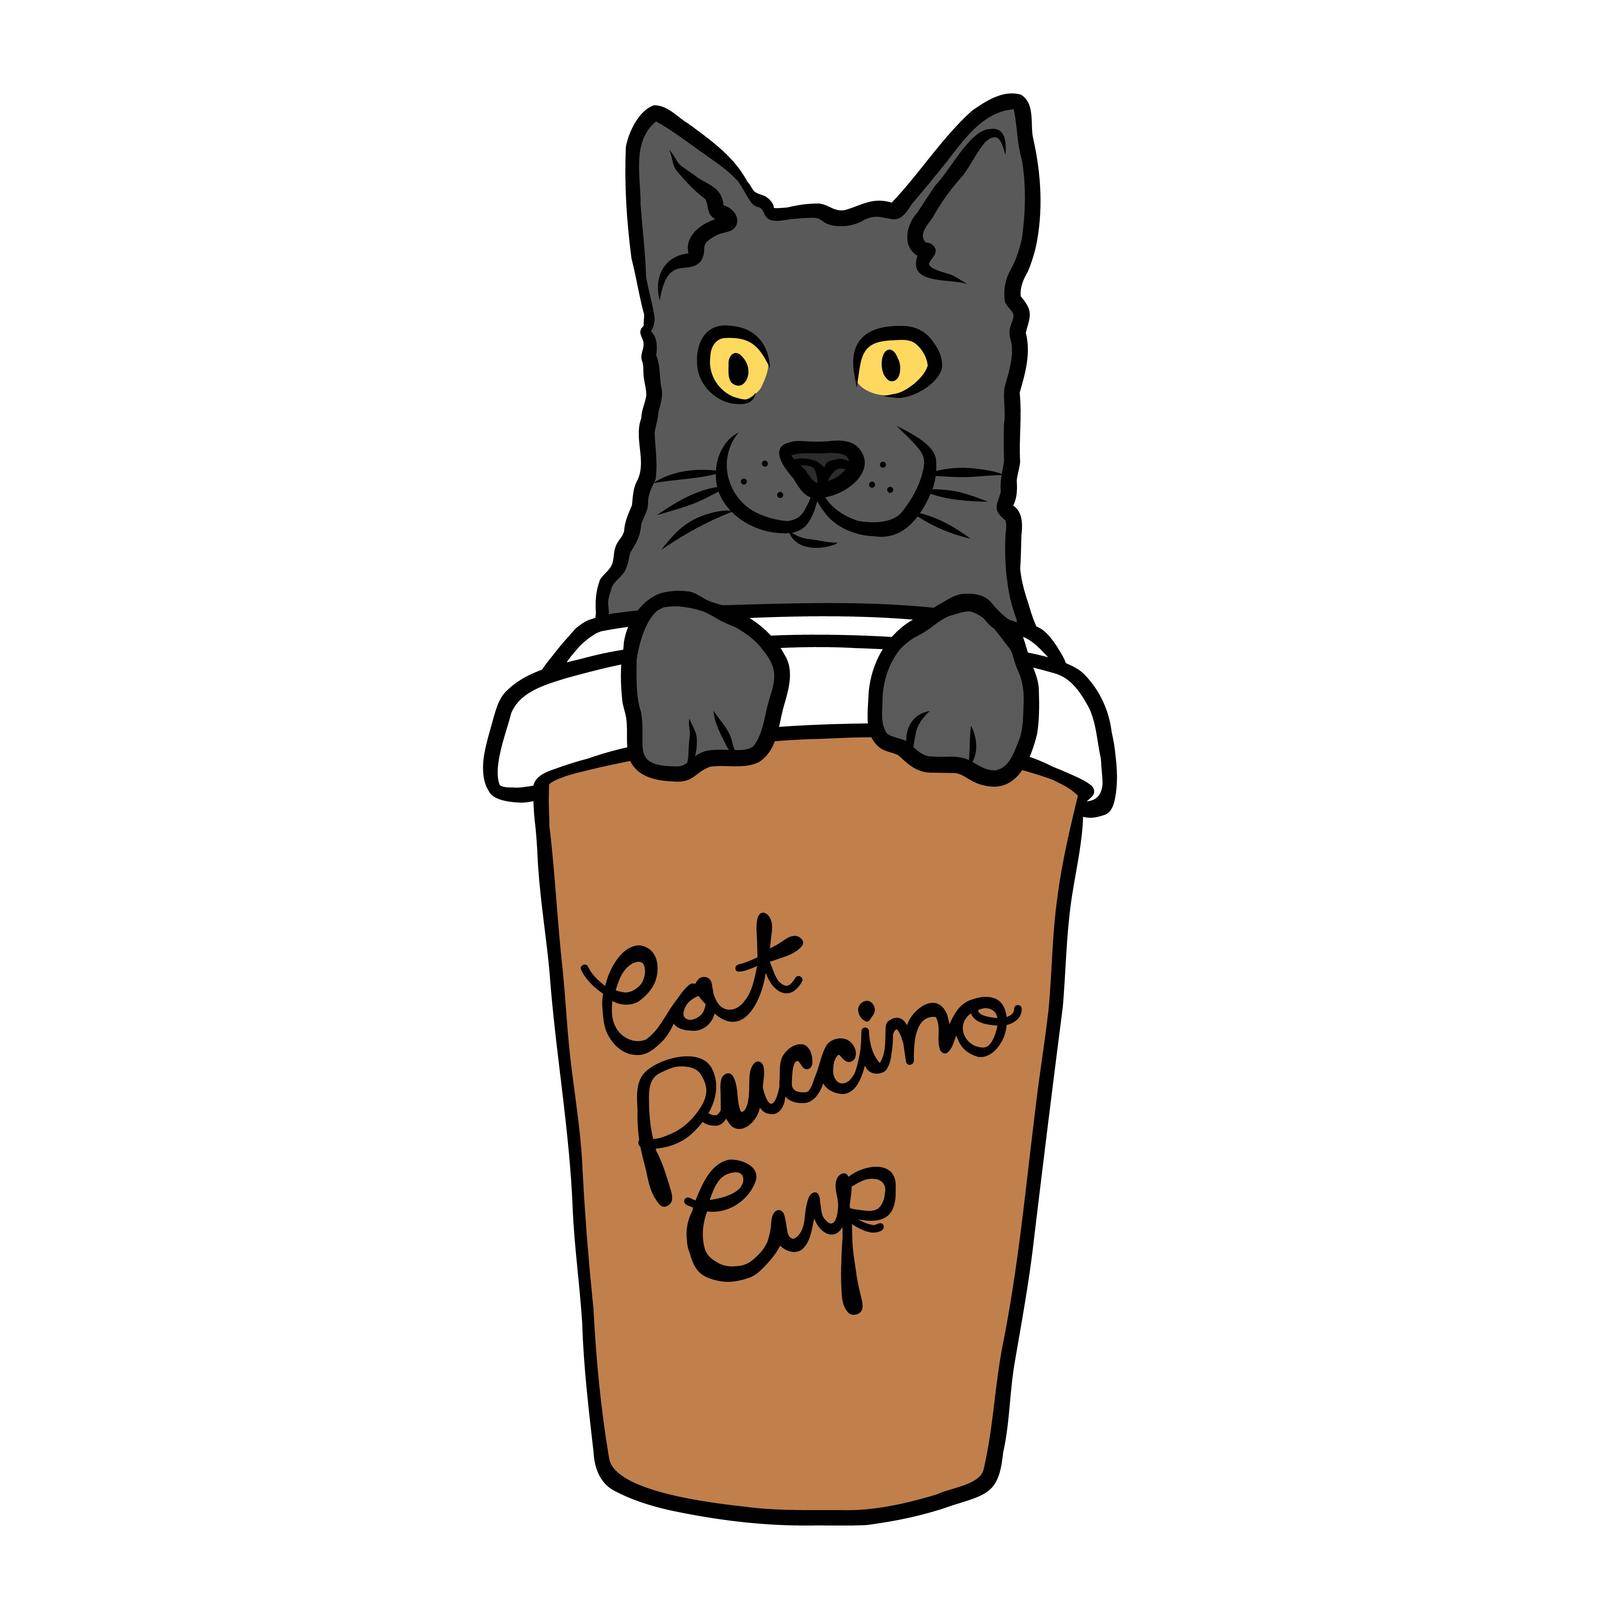 Catpuccino, cat in coffee cup cartoon vector illustration